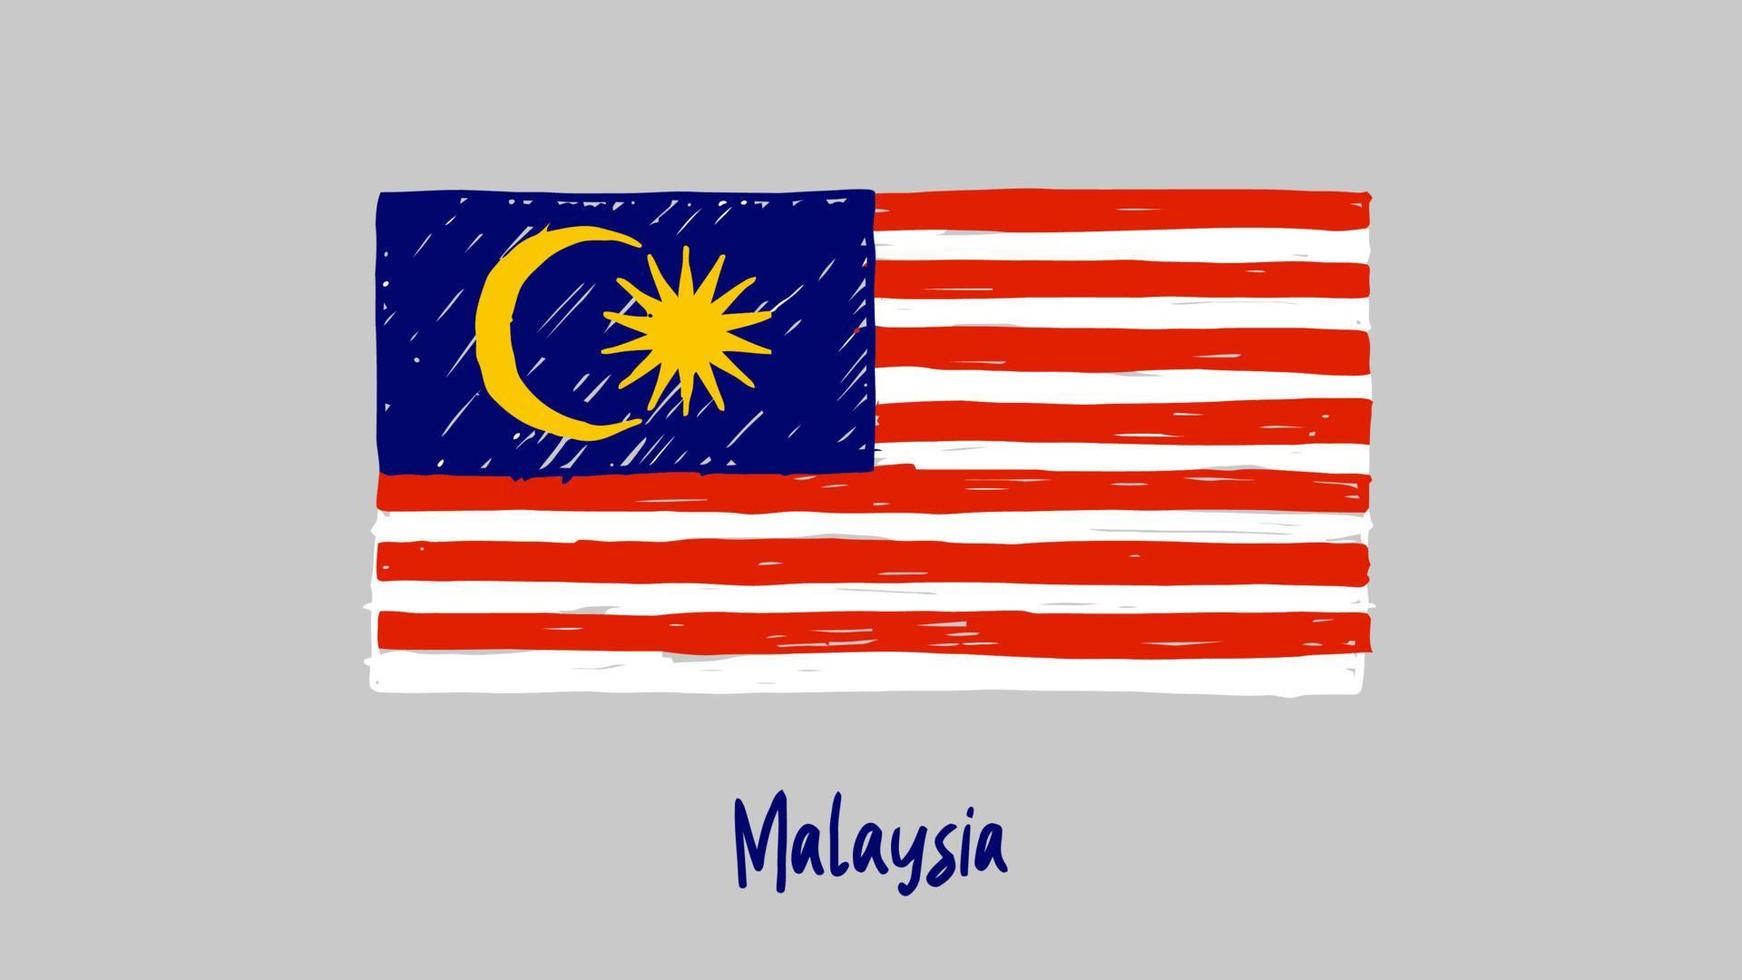 Malaysia National Country Flag Marker or Pencil Sketch Illustration Vector